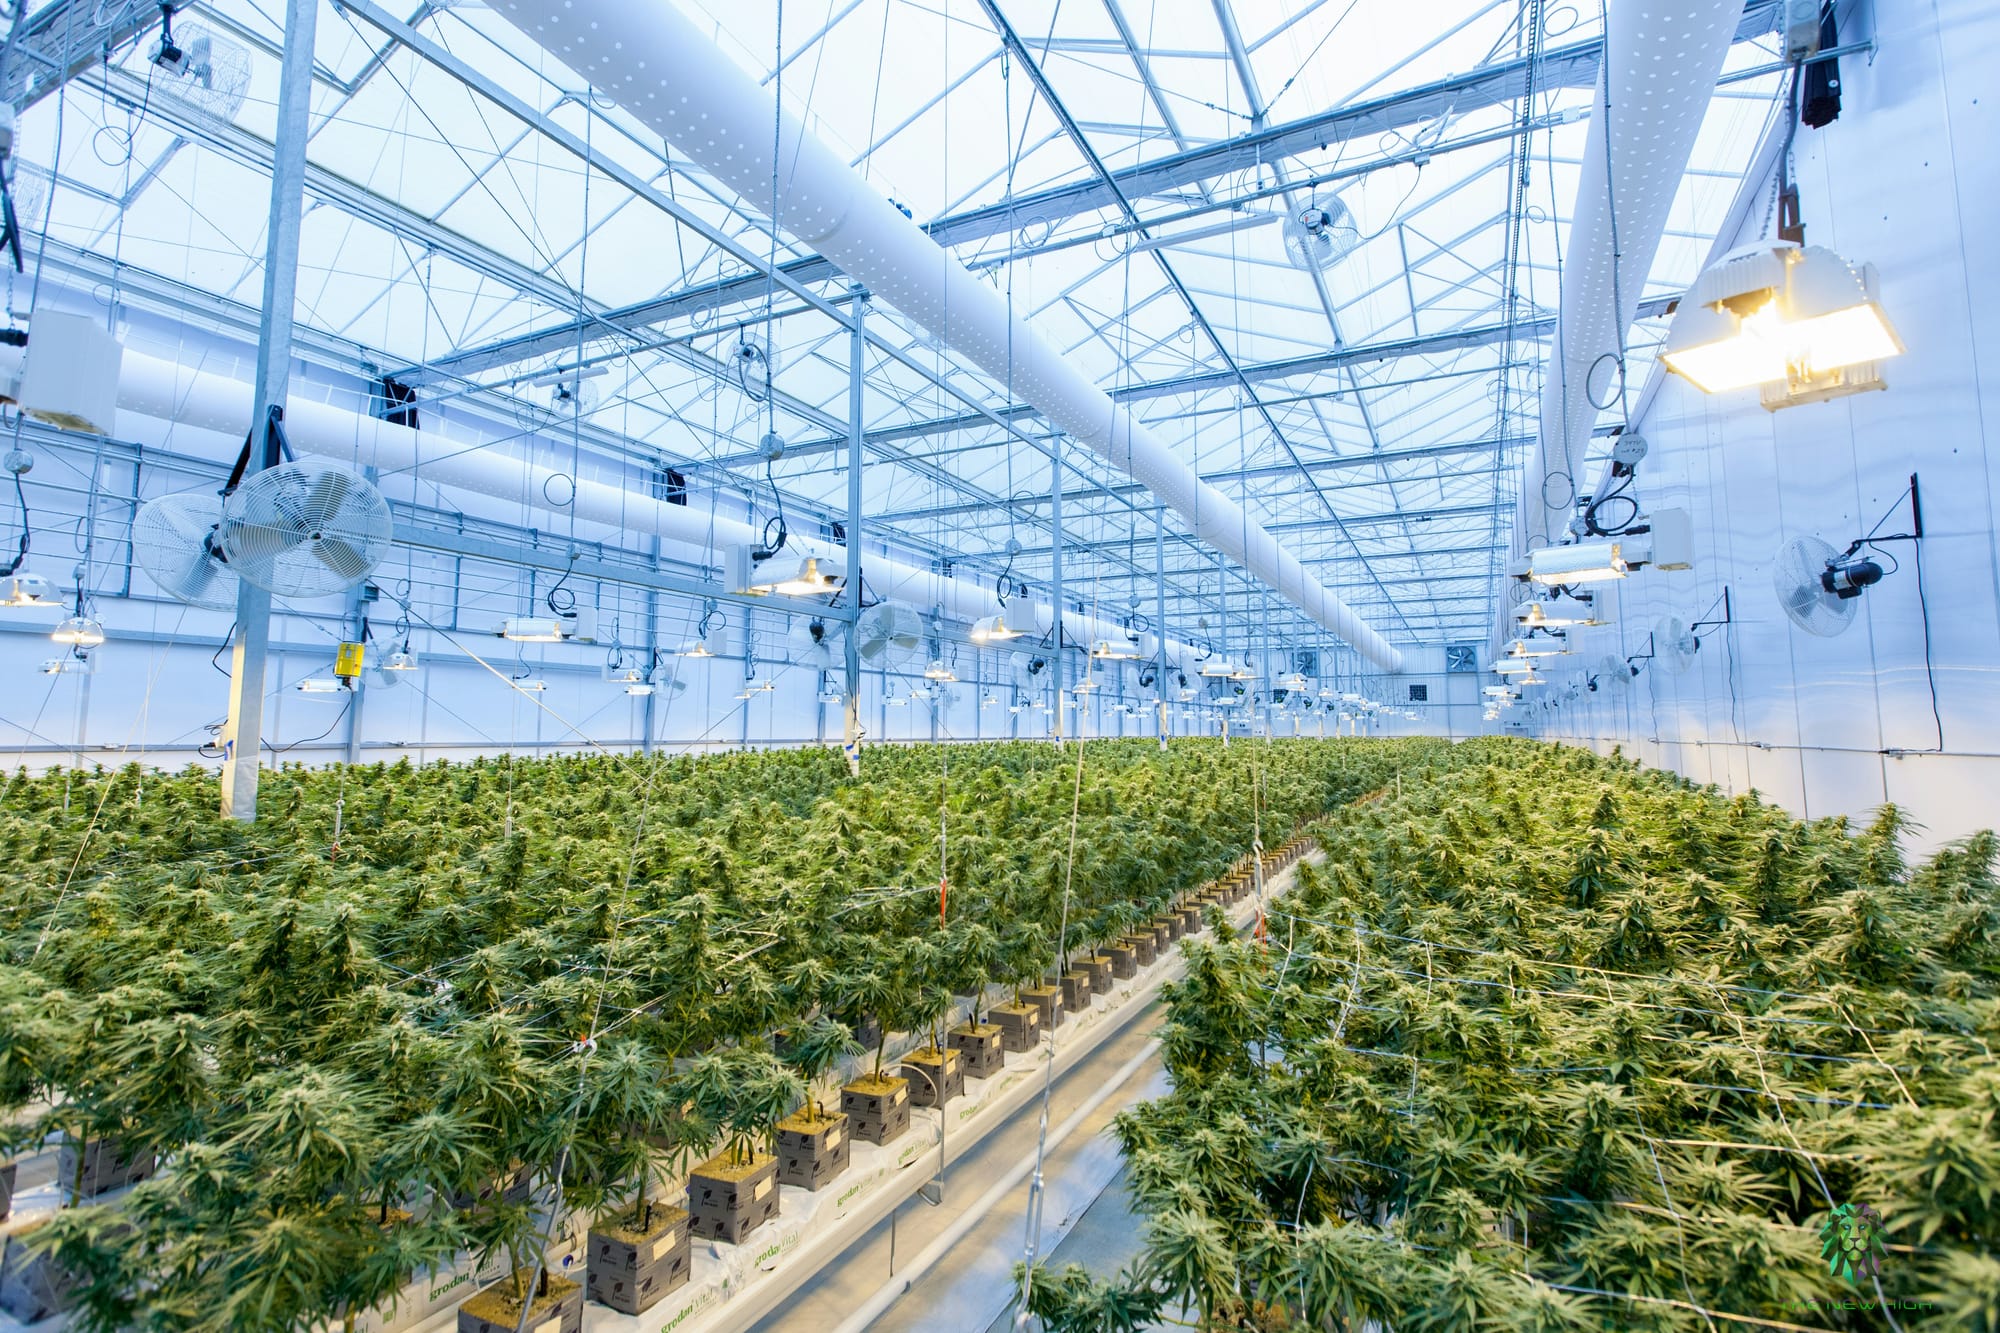 Financing The Stone: How The Cannabis Industry Is Going Digital